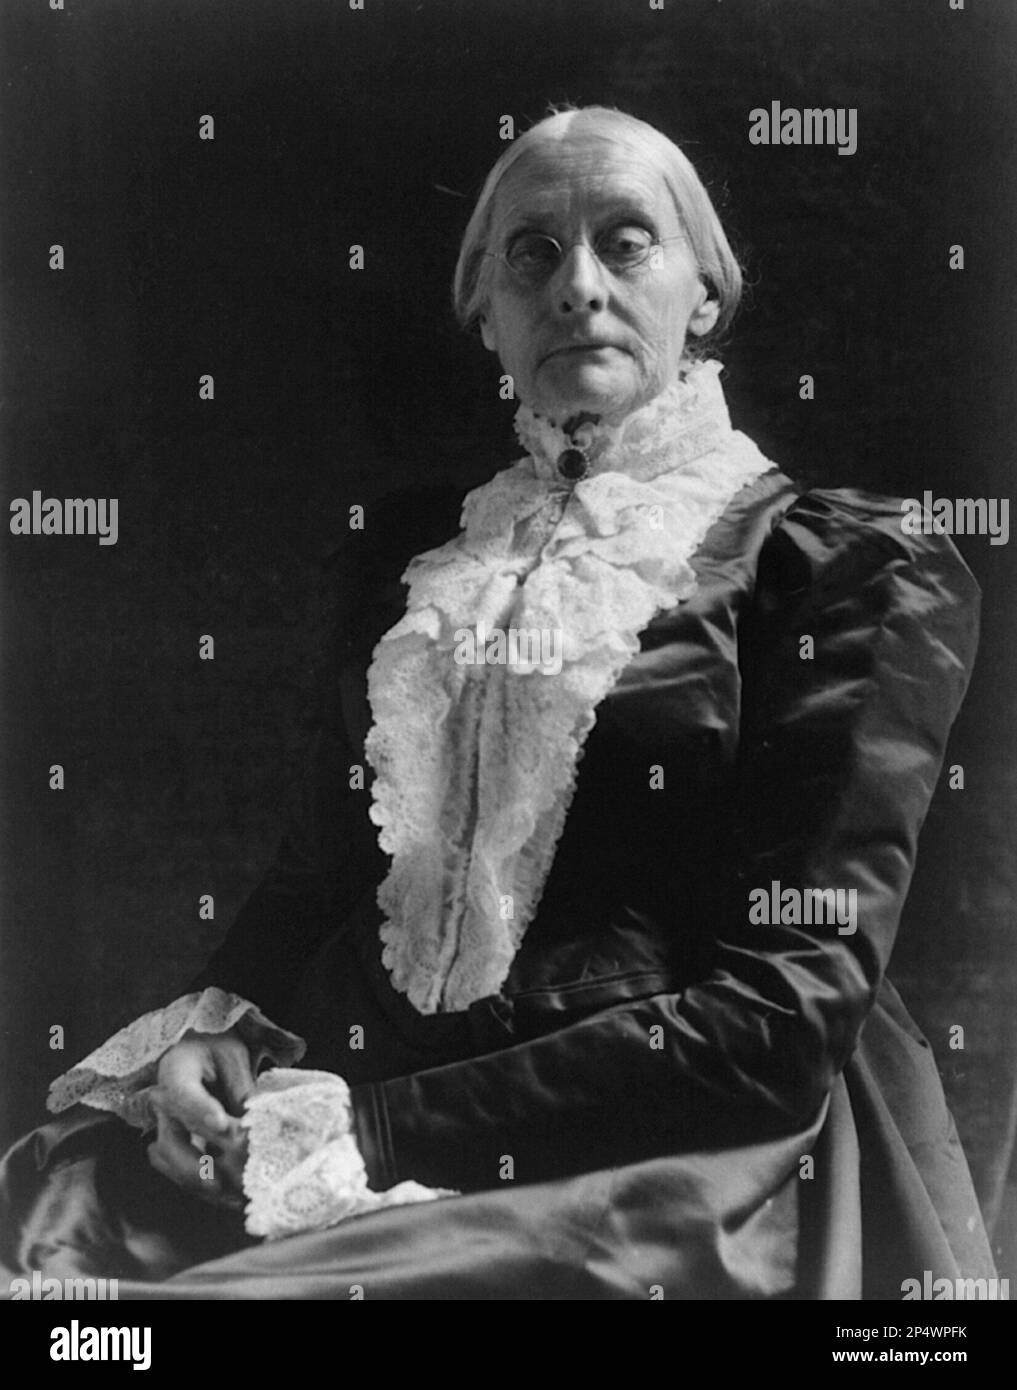 Frances Benjamin Johnston photograph of Susan B. Anthony an American social reformer and women's rights activist - c1900 Stock Photo